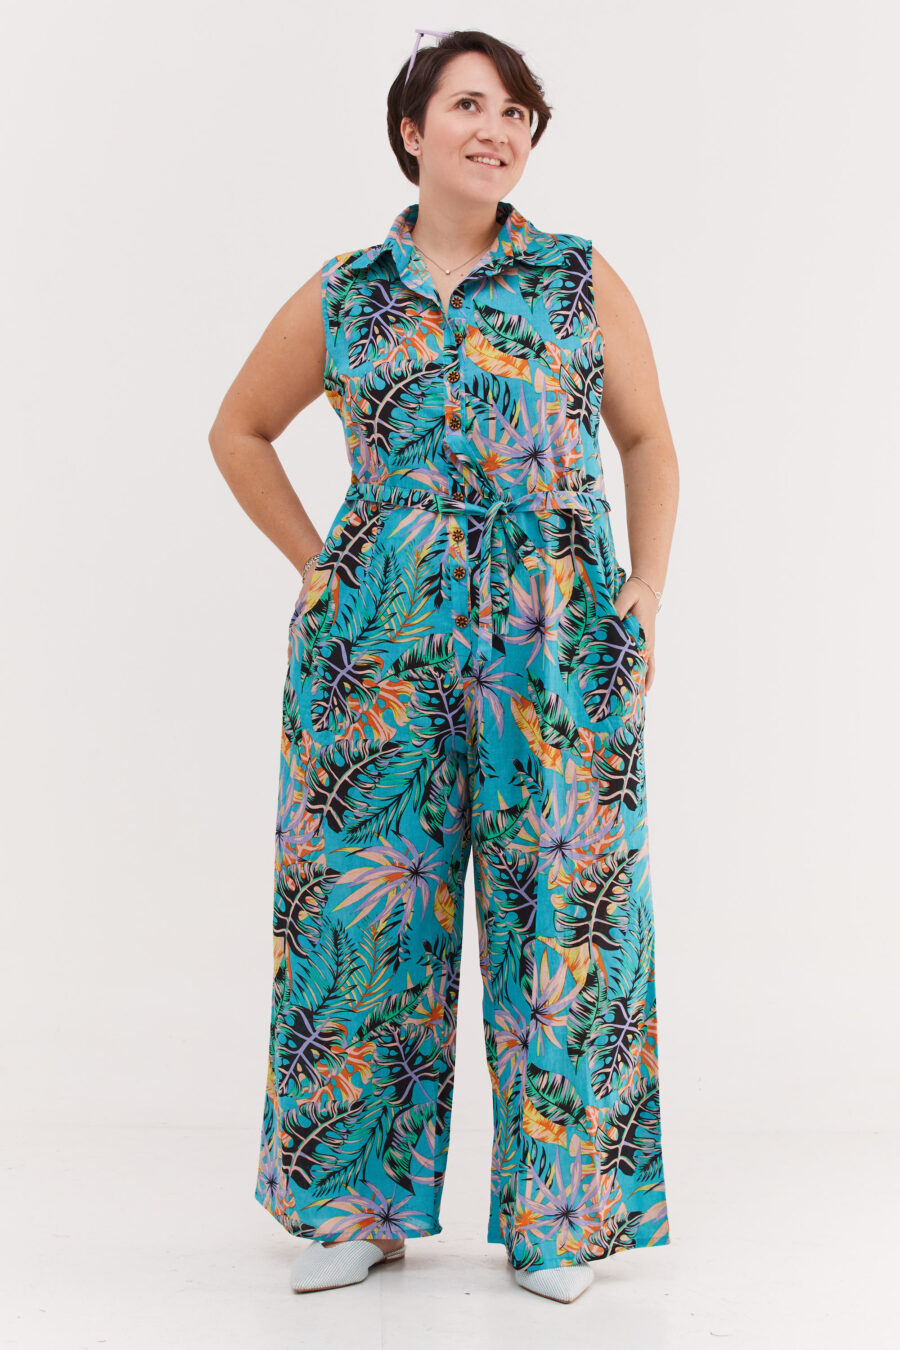 Oversized overall | Uniquely designed Overall – Tropical sunrise print, tourquise dress with tropical print in sunrise colours